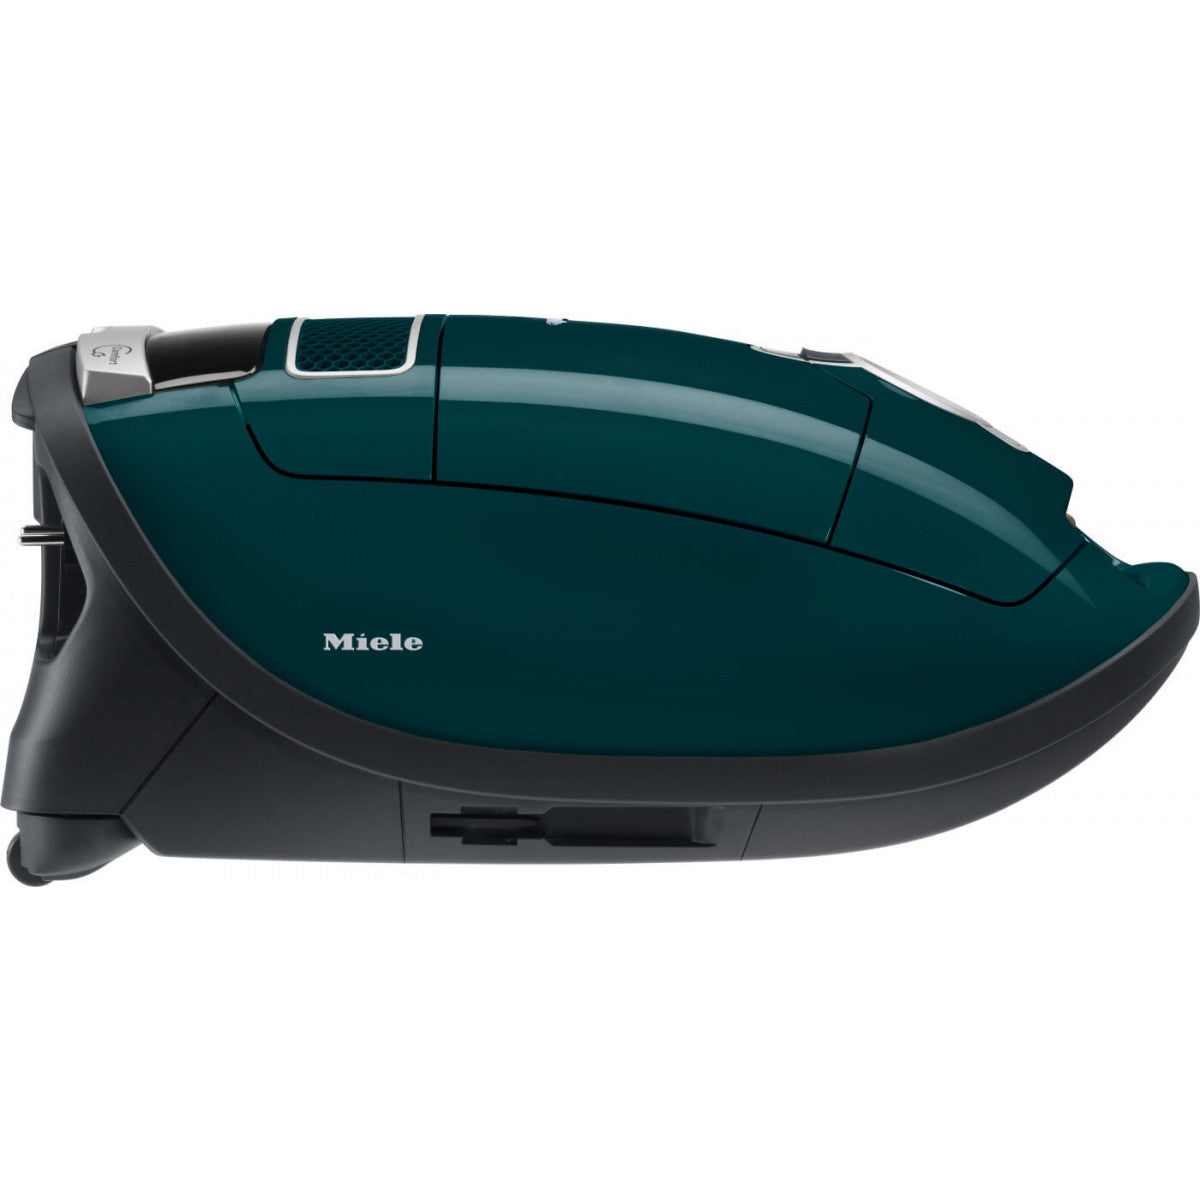 Miele Complete C3 Alize Vacuum Cleaner